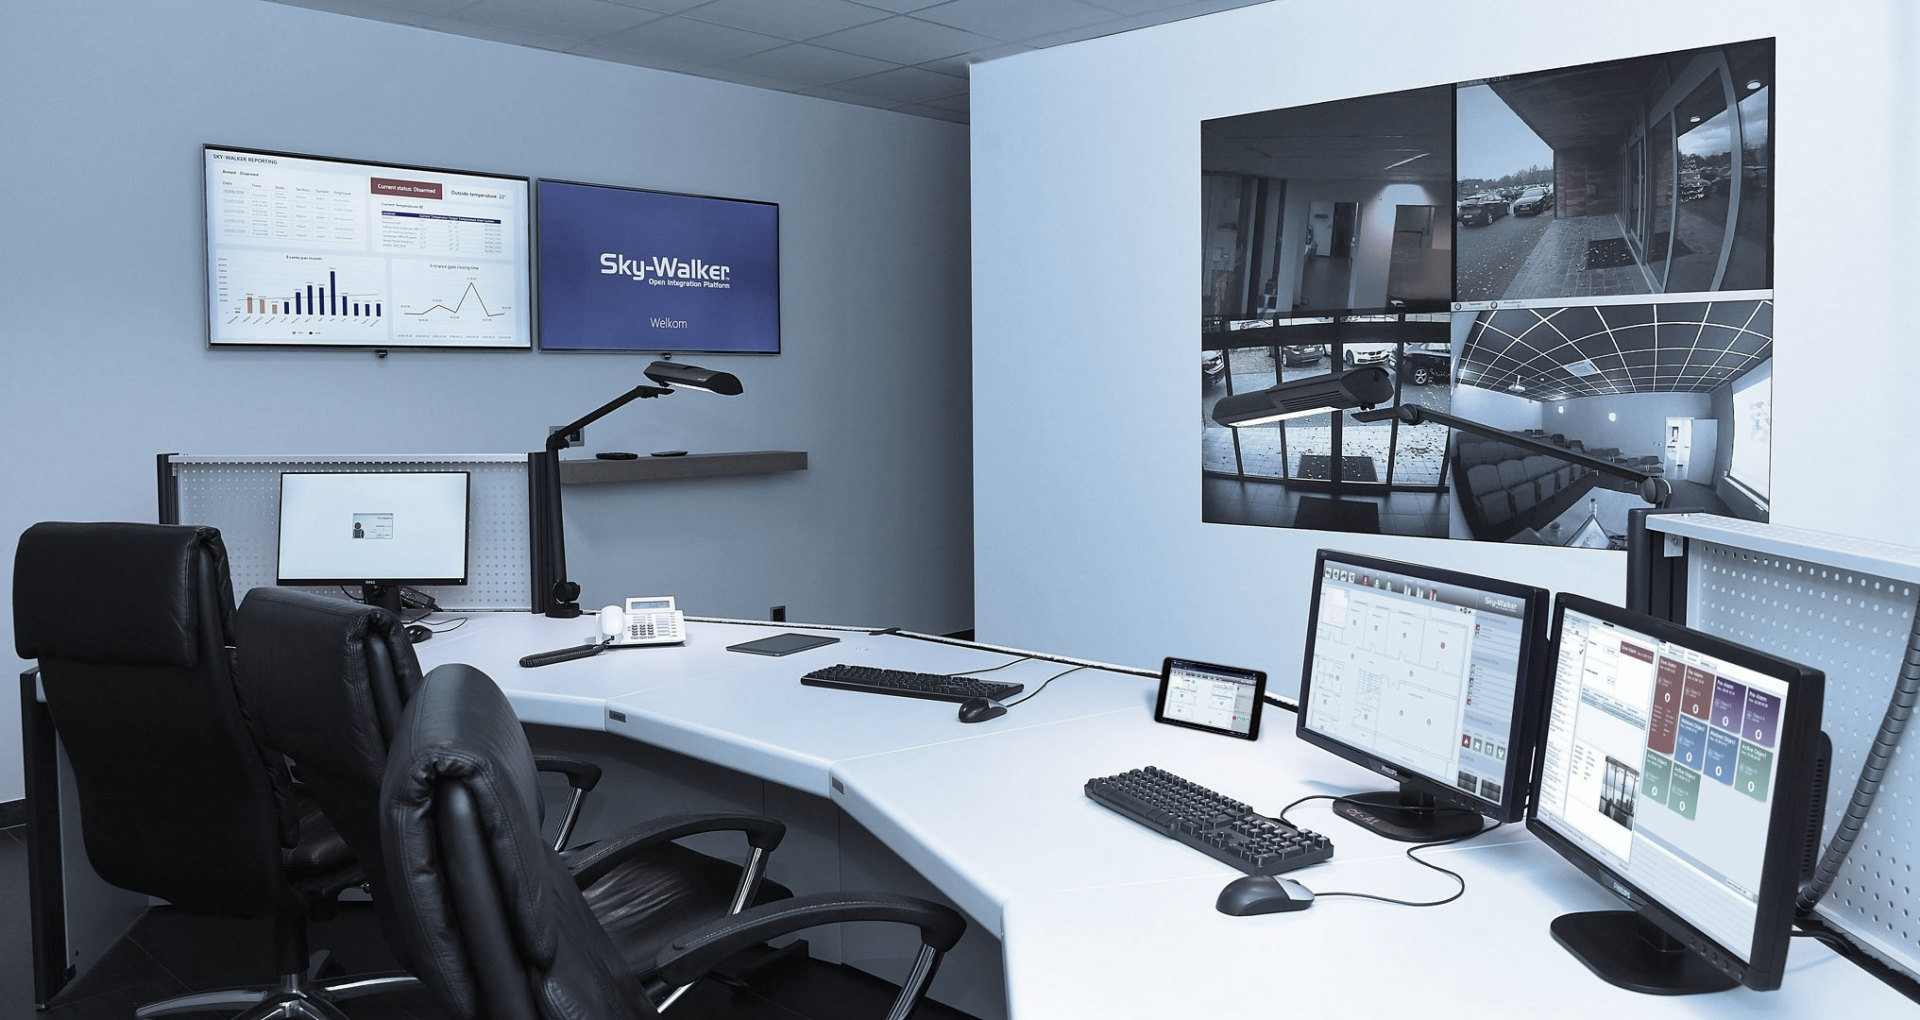 Sky-Walker control room to manage safety, security, and comfort systems centrally